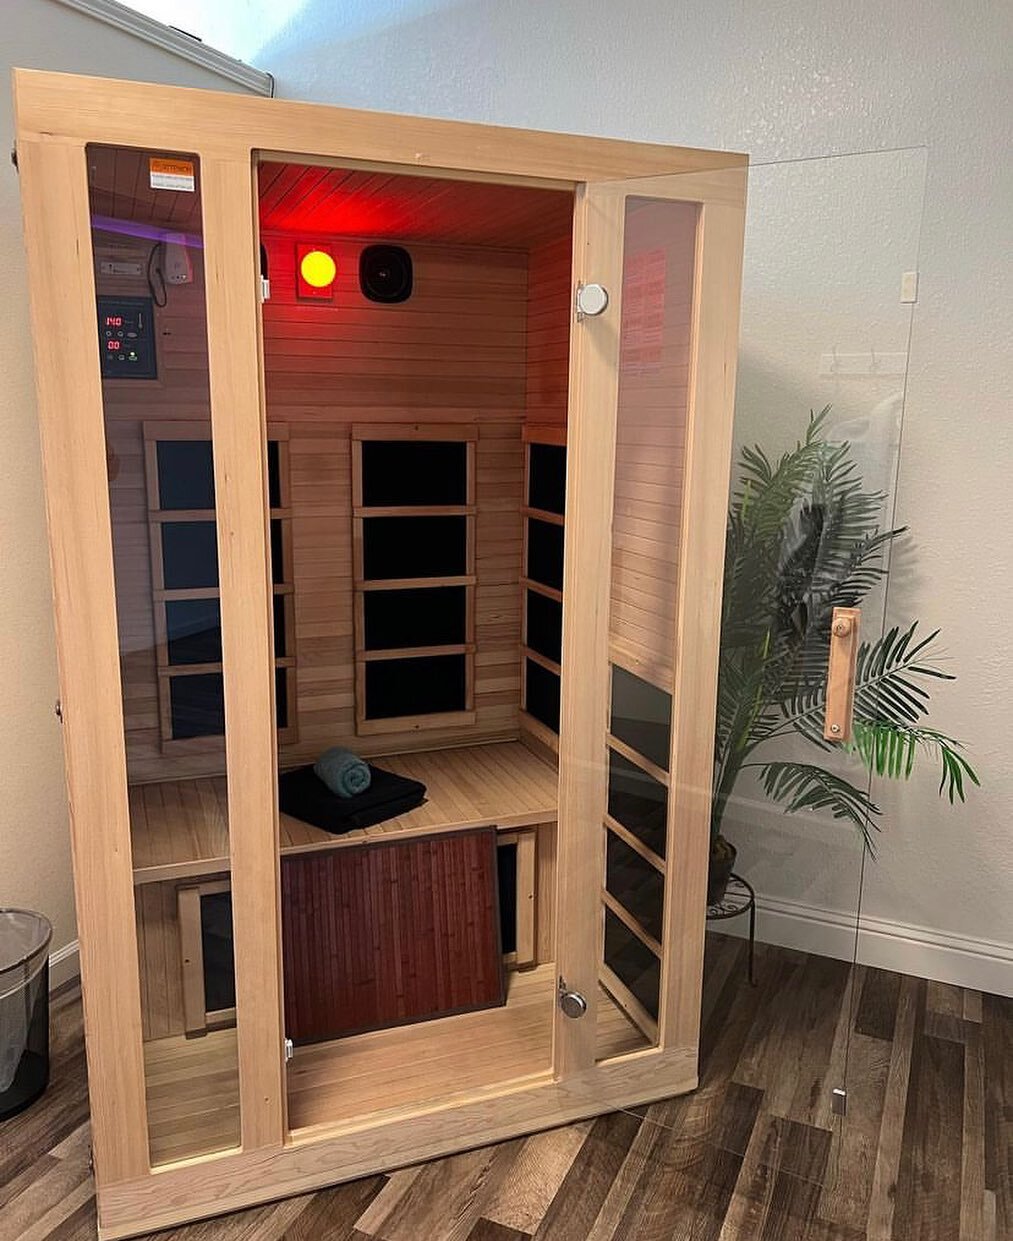 Infrared sauna membership, $99 for 1 month unlimited sessions! Now that&rsquo;s a 🔥 deal! 
.
.
Flush out toxins , burn calories, increased heat rate for cardiovascular health benefits, ease muscle pain and much more! 
.
.
Give us a call at 715-7126 